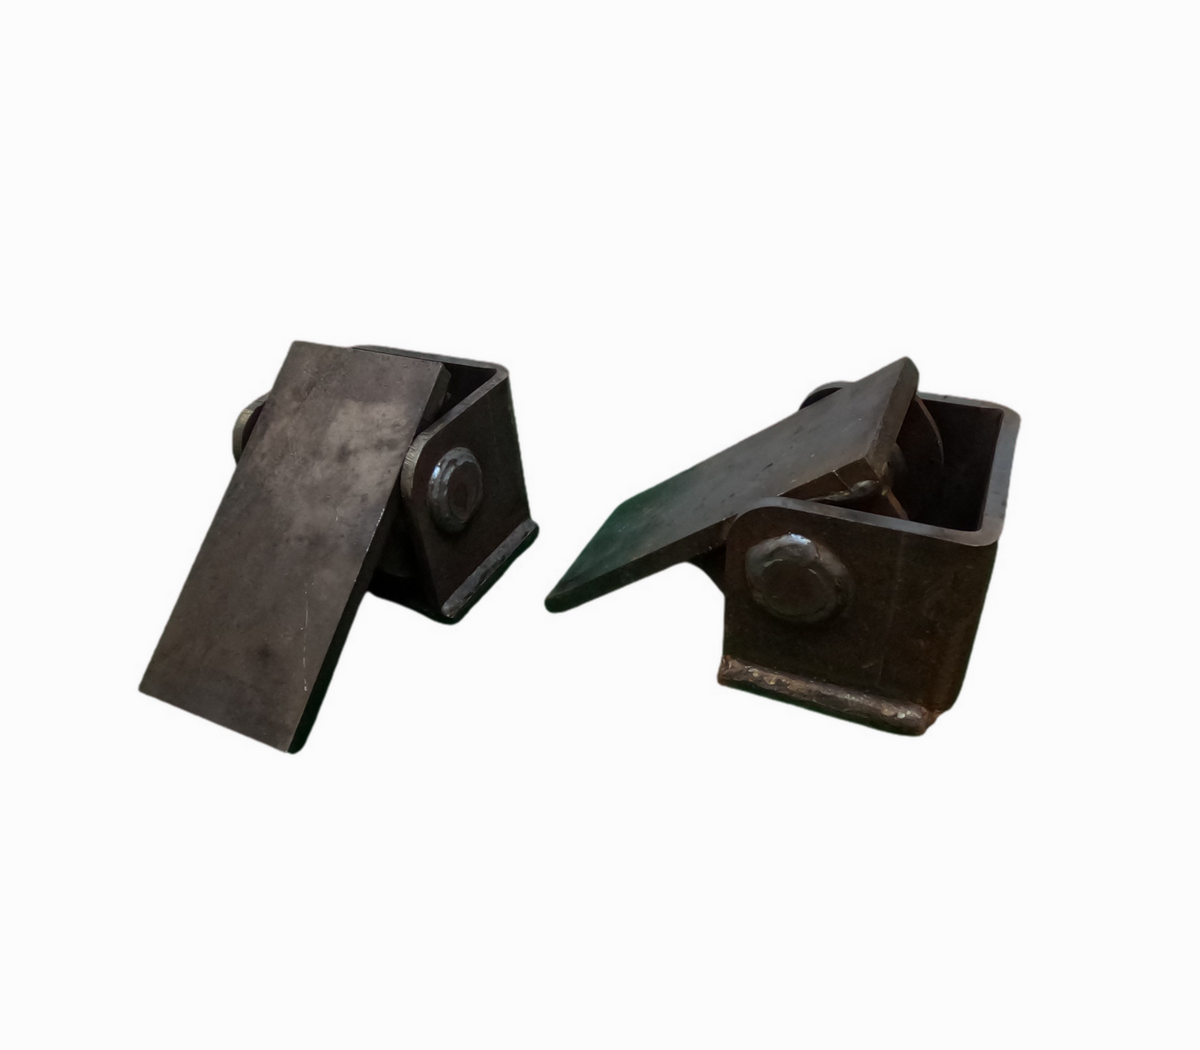 Heavy duty hinges for hydraulic dump bed systems. 